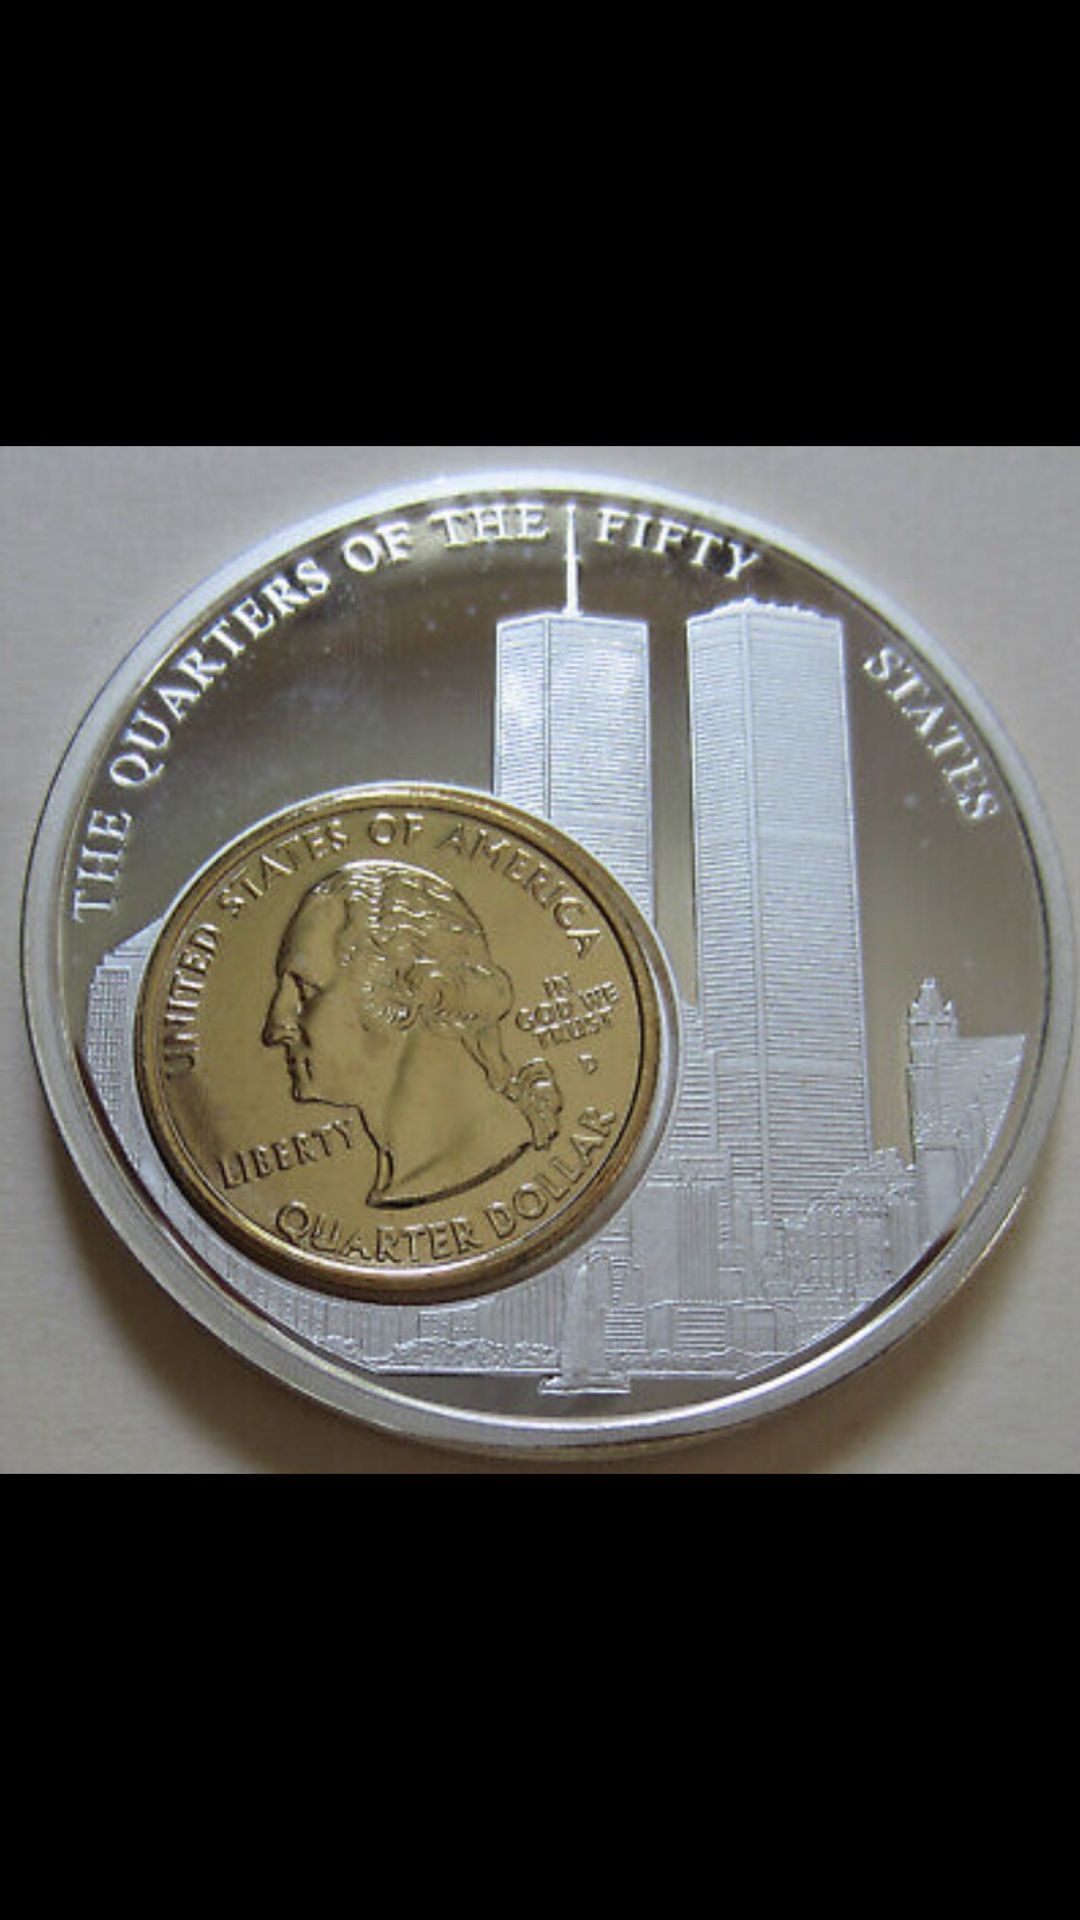 Quarters of Fifty States First Strike 2oz .999 Fine Silver